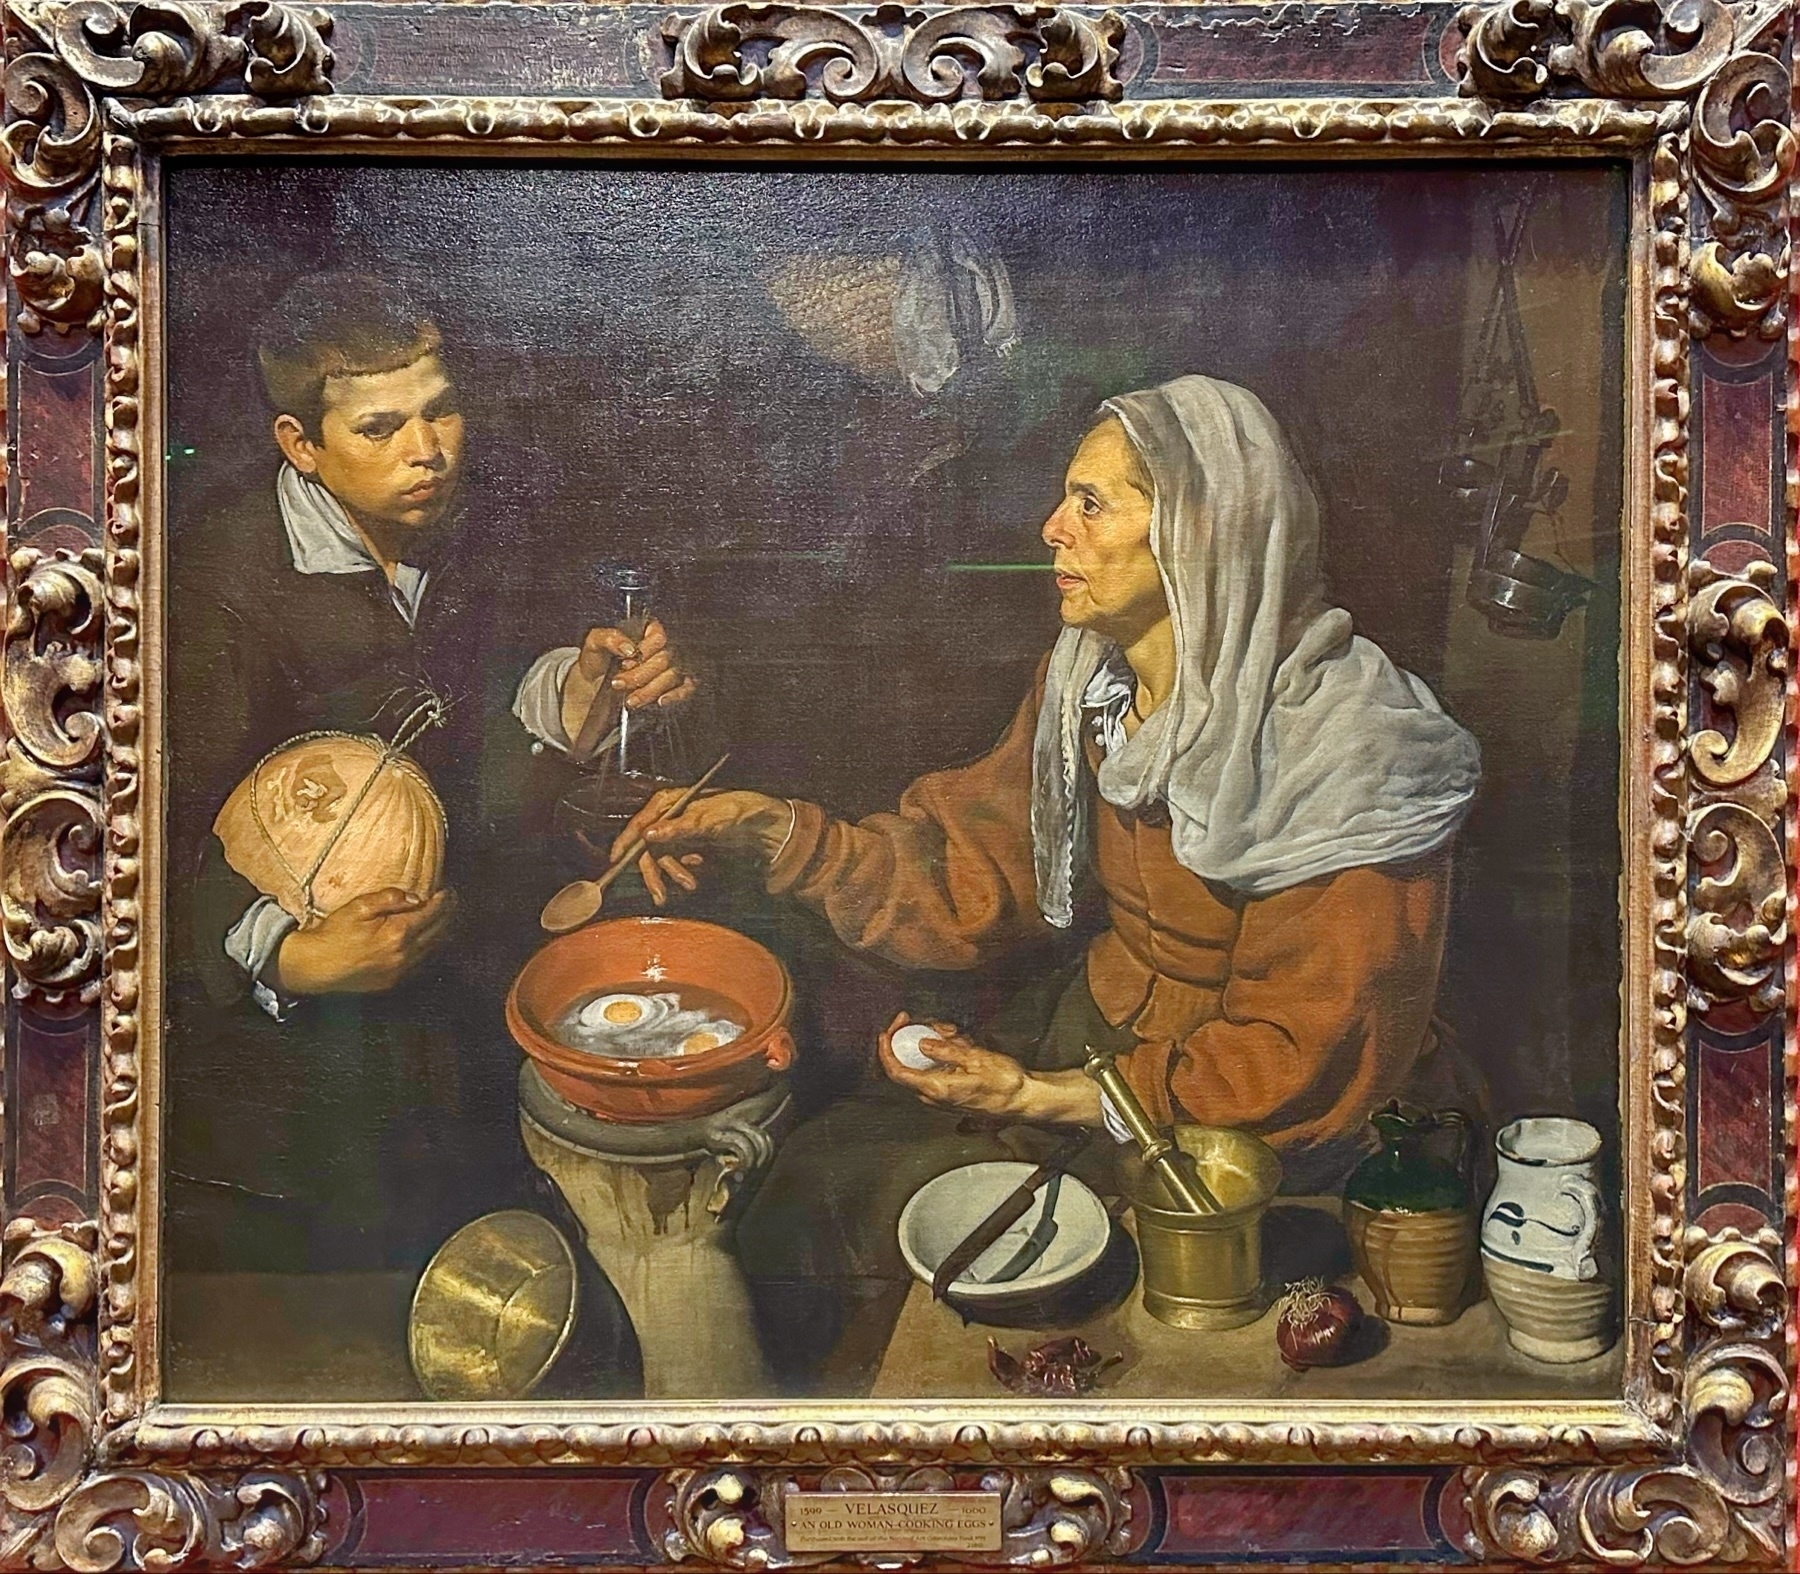 Oil painting depicting an older woman cooking eggs in a pan over a flame, with a young boy watching intently. They are surrounded by kitchen items including a mortar and pestle, a jug, and some vegetables.